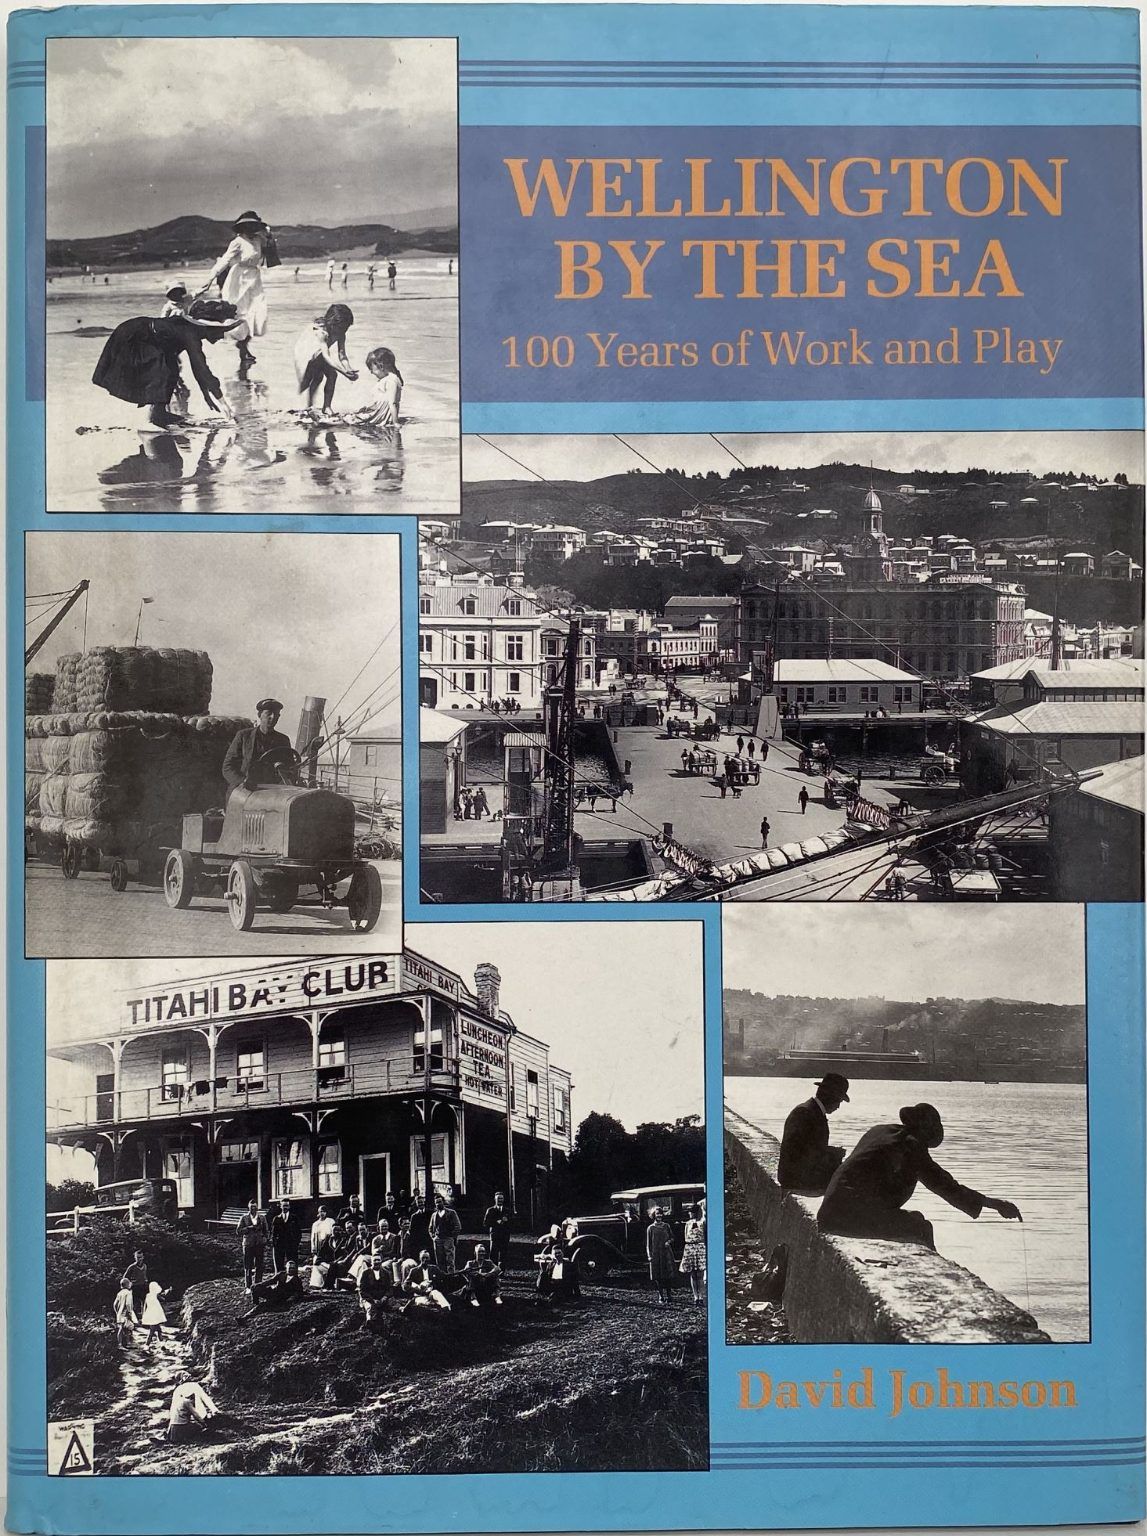 WELLINGTON BY THE SEA: 100 Years of Work and Play